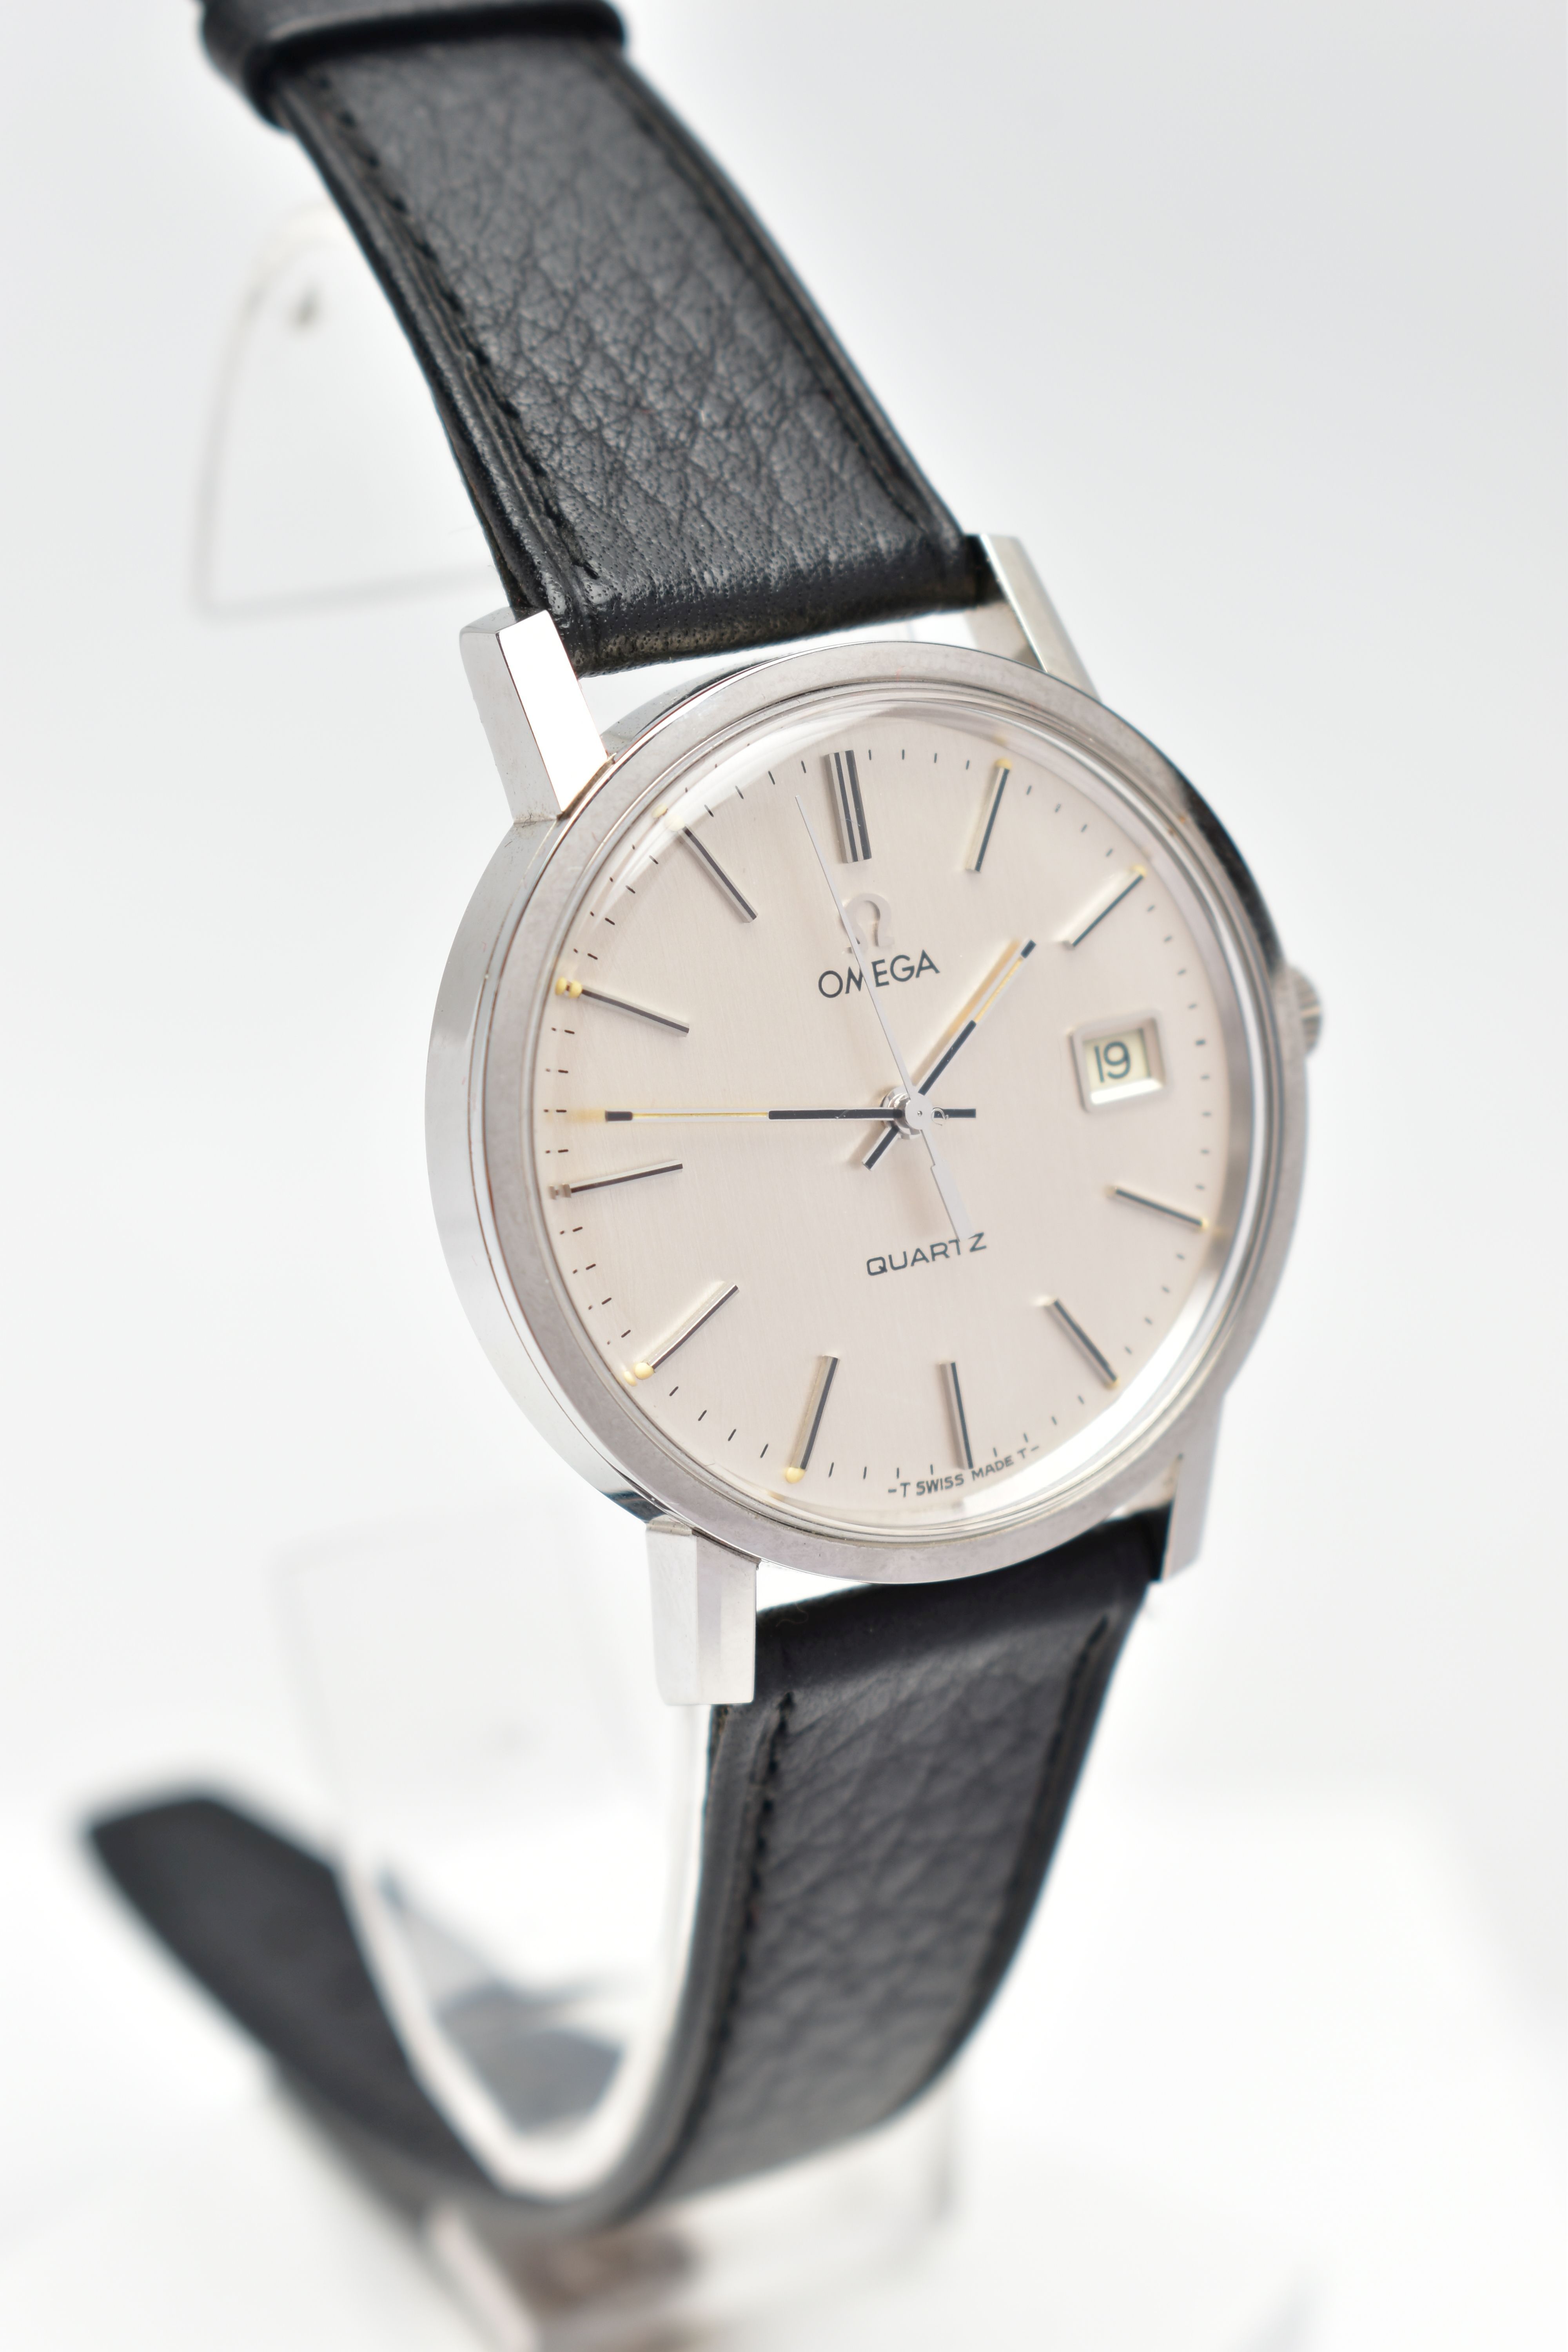 A GENTLEMANS OMEGA WRISTWATCH, the circular champagne dial, with baton hourly markers, date window - Image 2 of 8